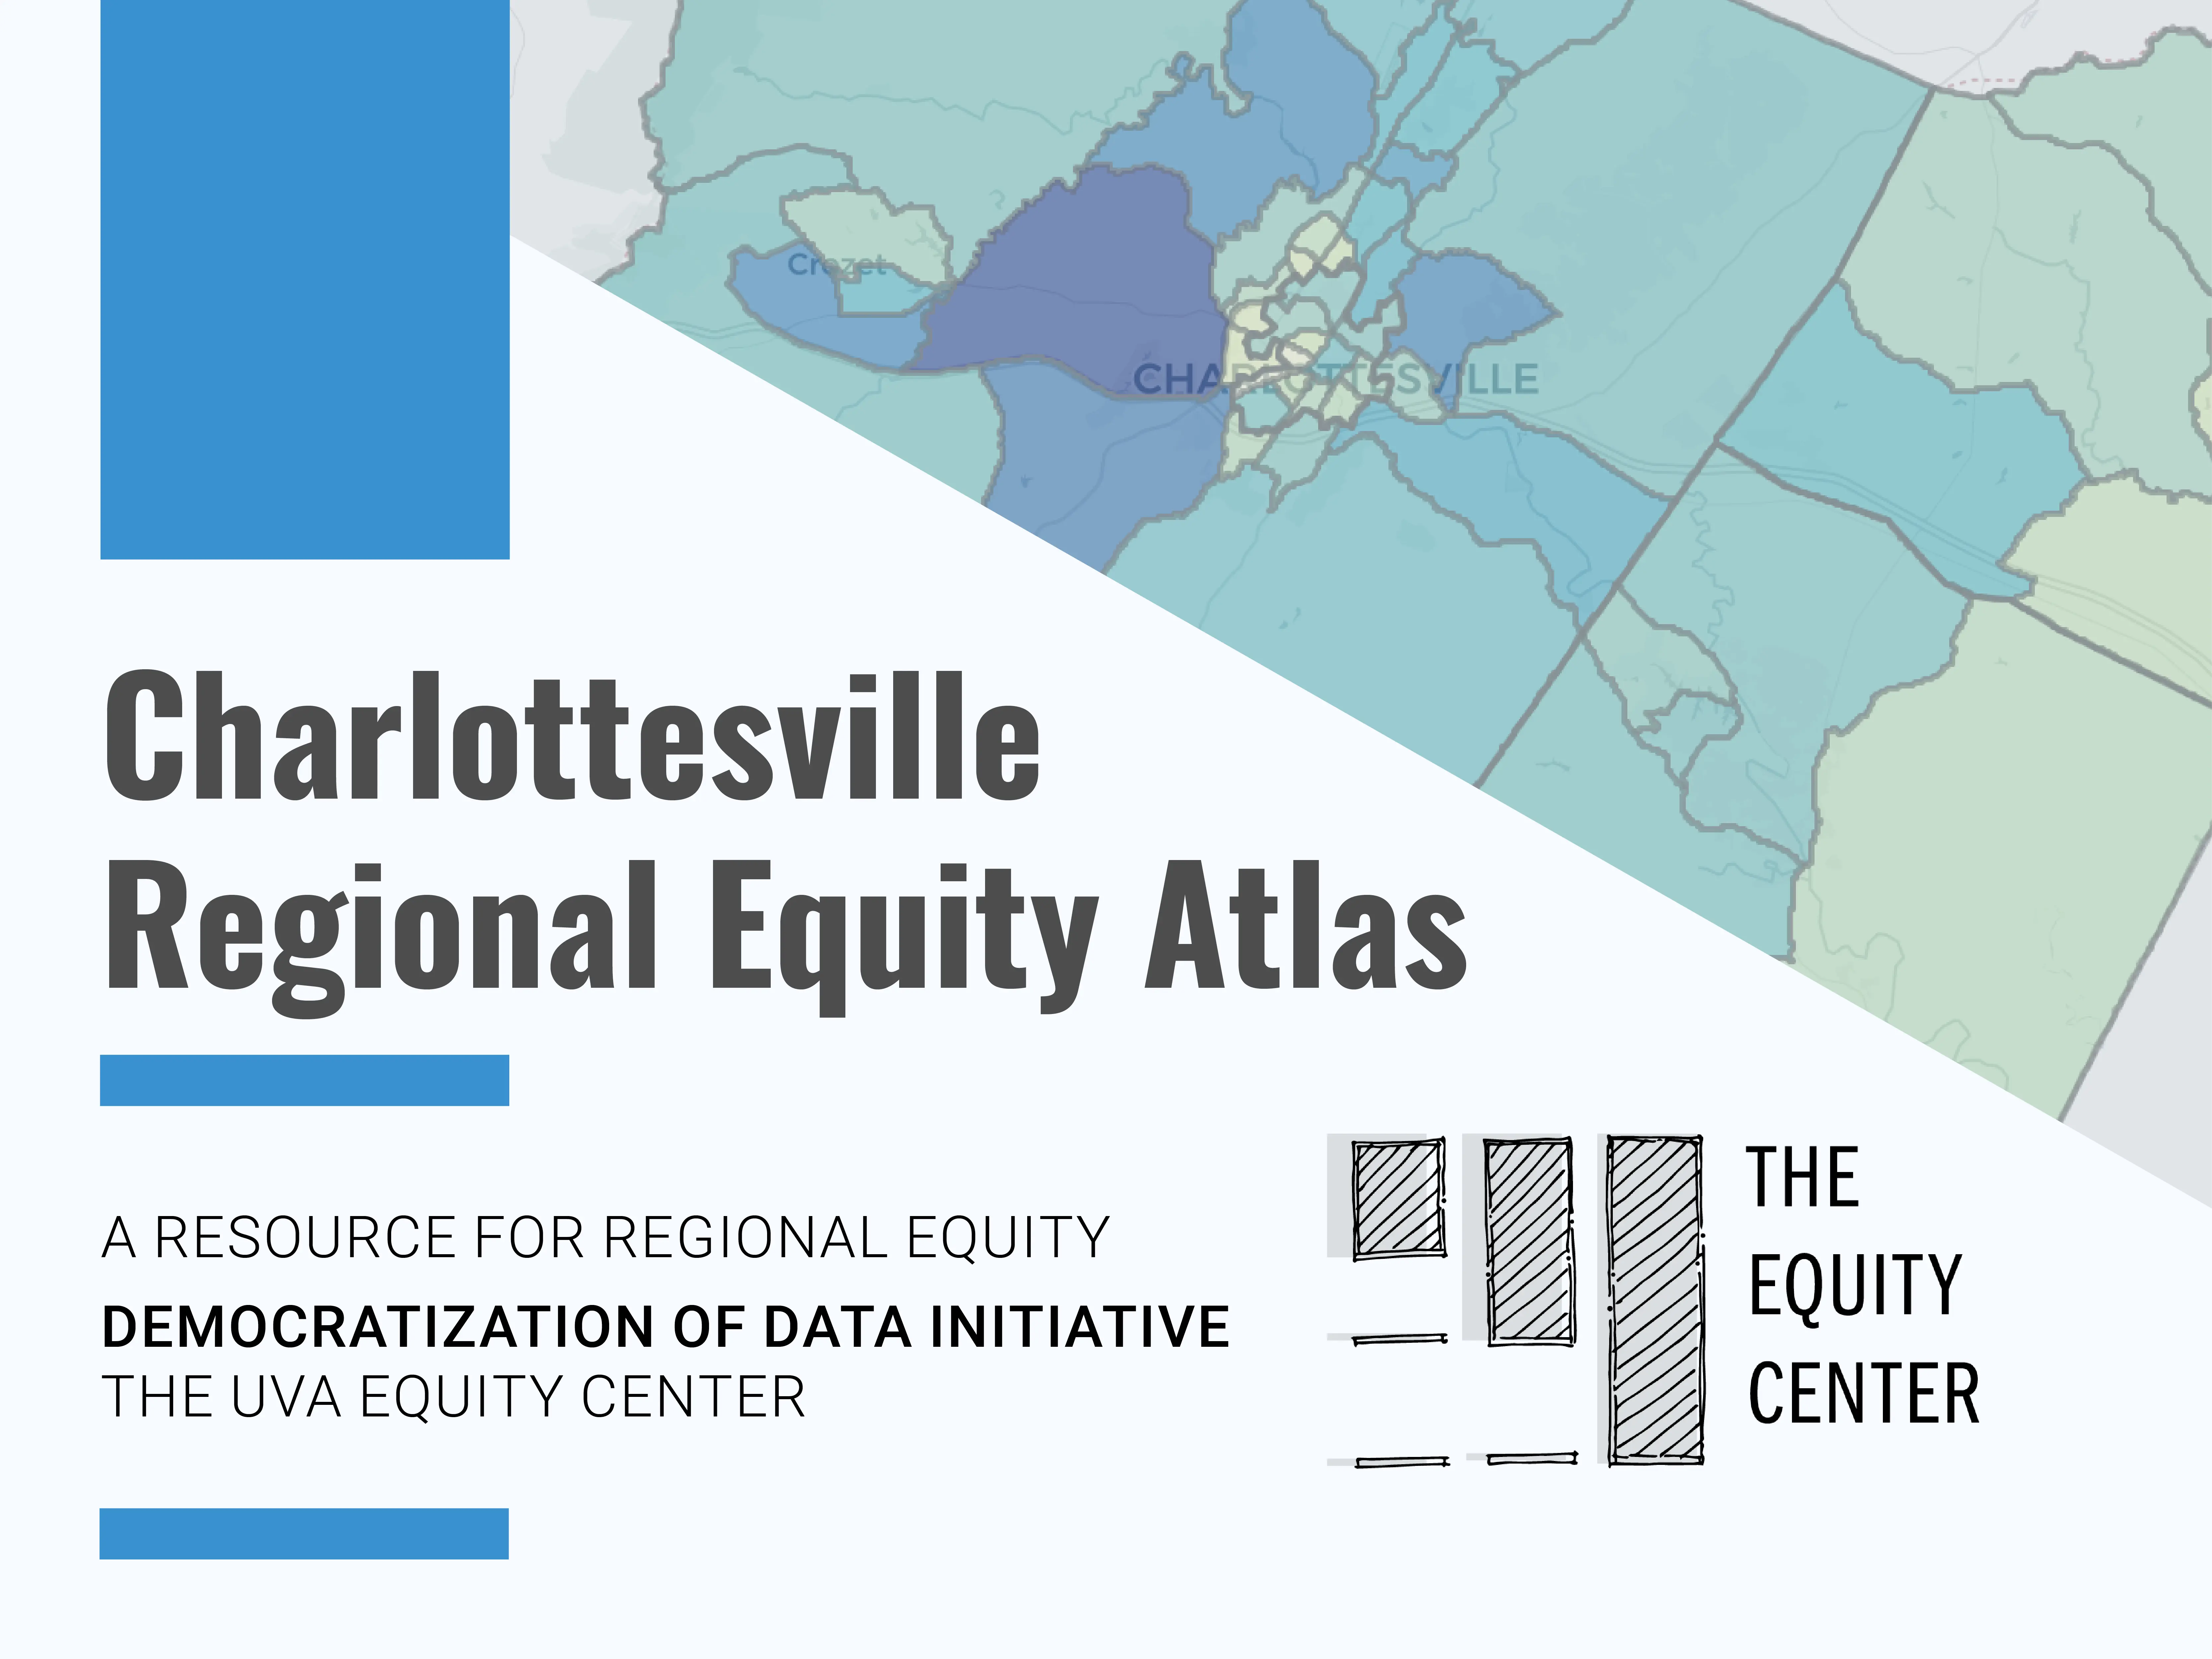 Charlottesville Regional Equity Atlas card with map image and equity center logo